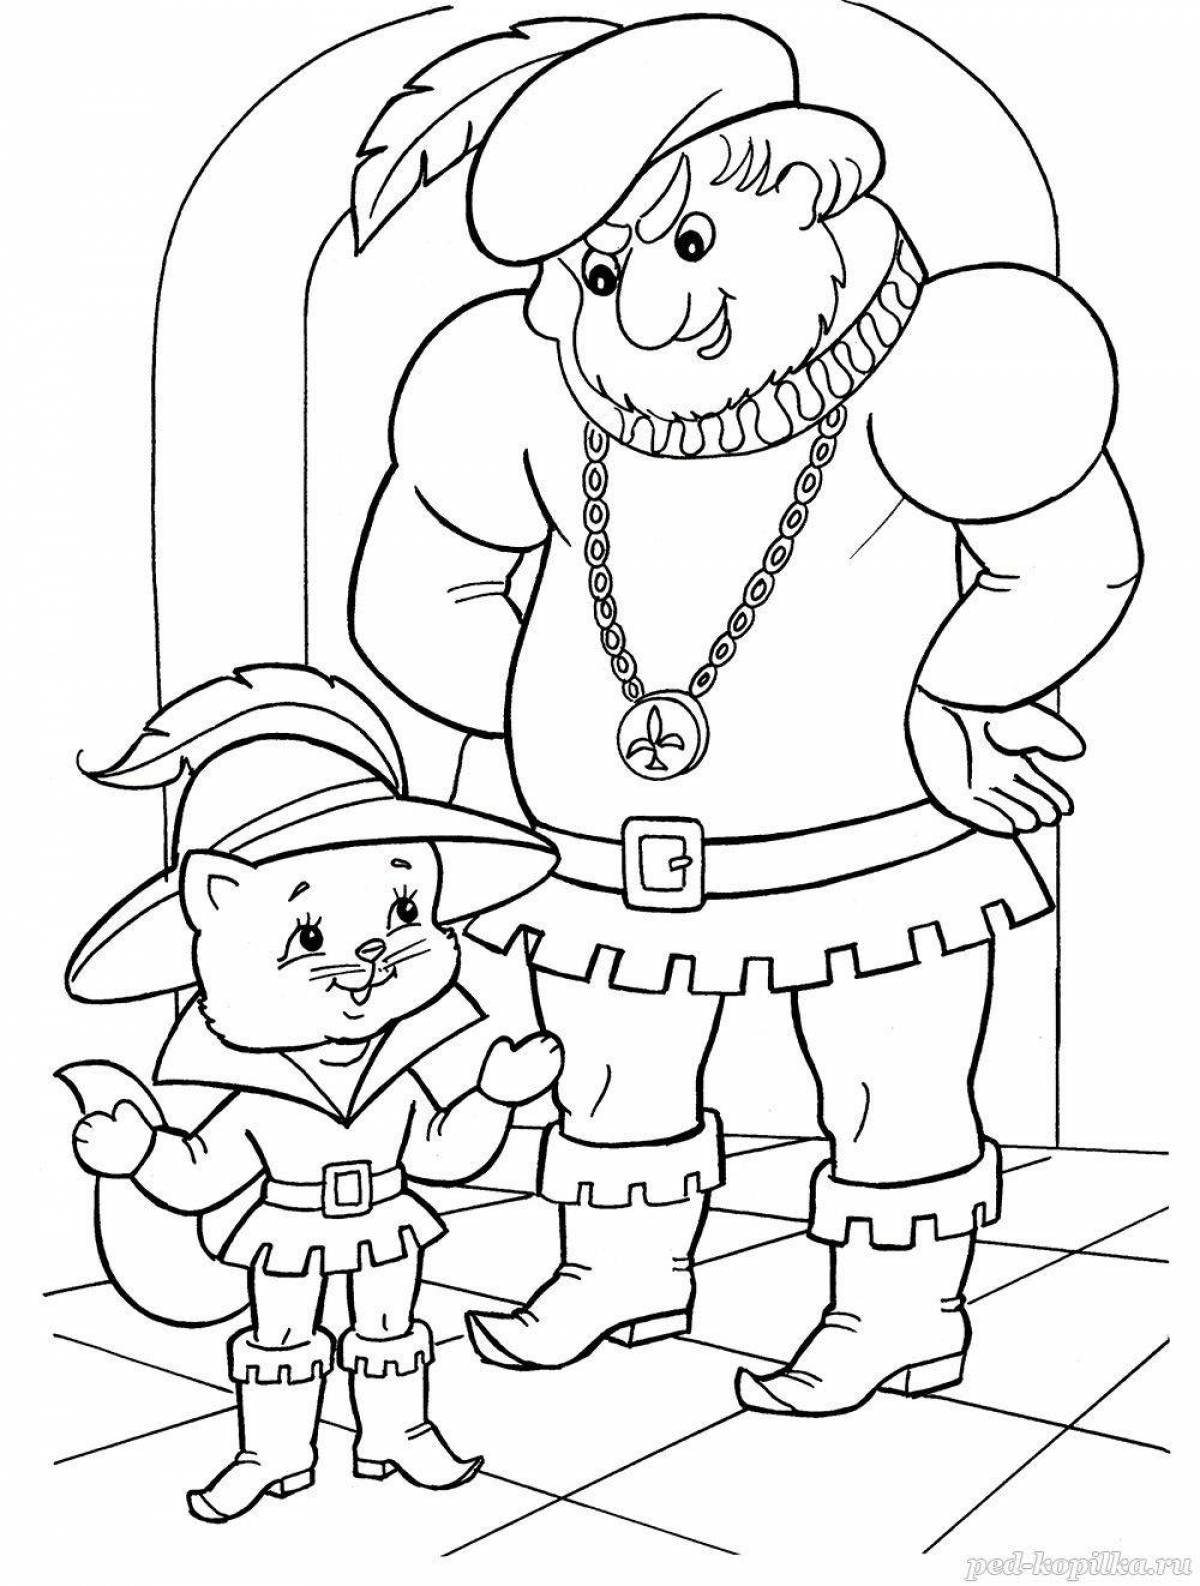 Ambitious Puss in Boots coloring page for kids